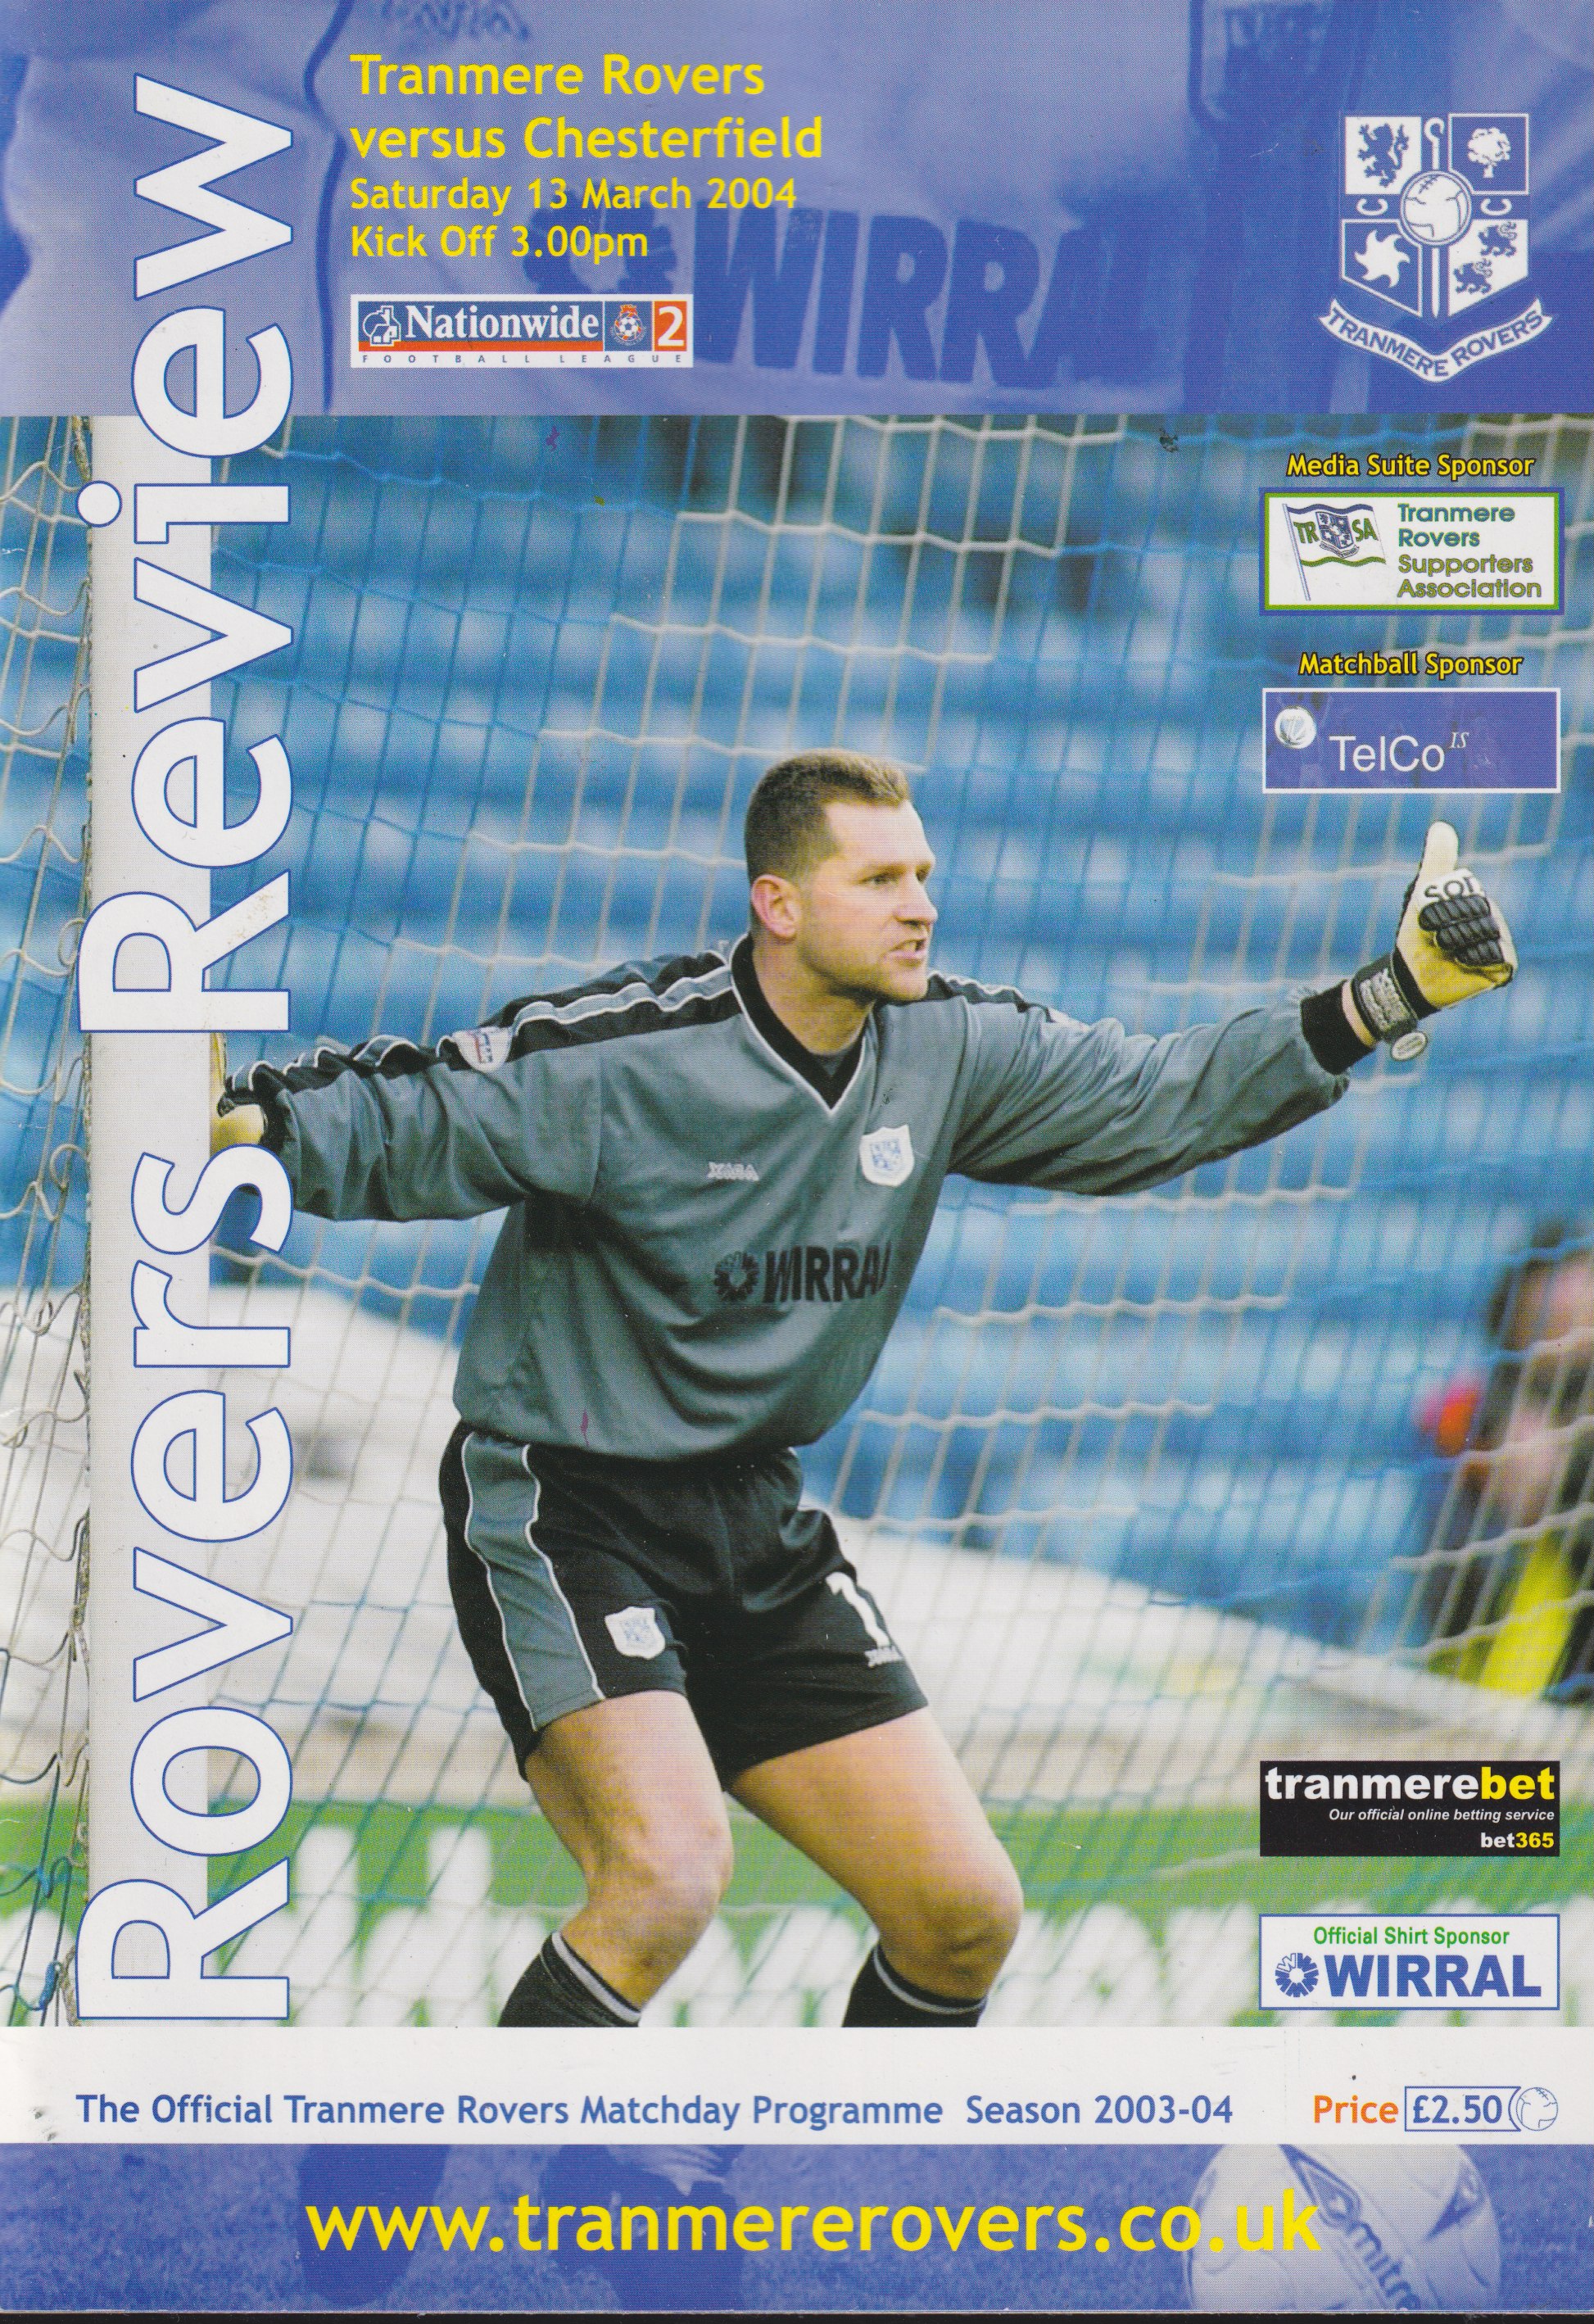 Match Programme For {home}} 2-3 Chesterfield, League, 2004-03-13